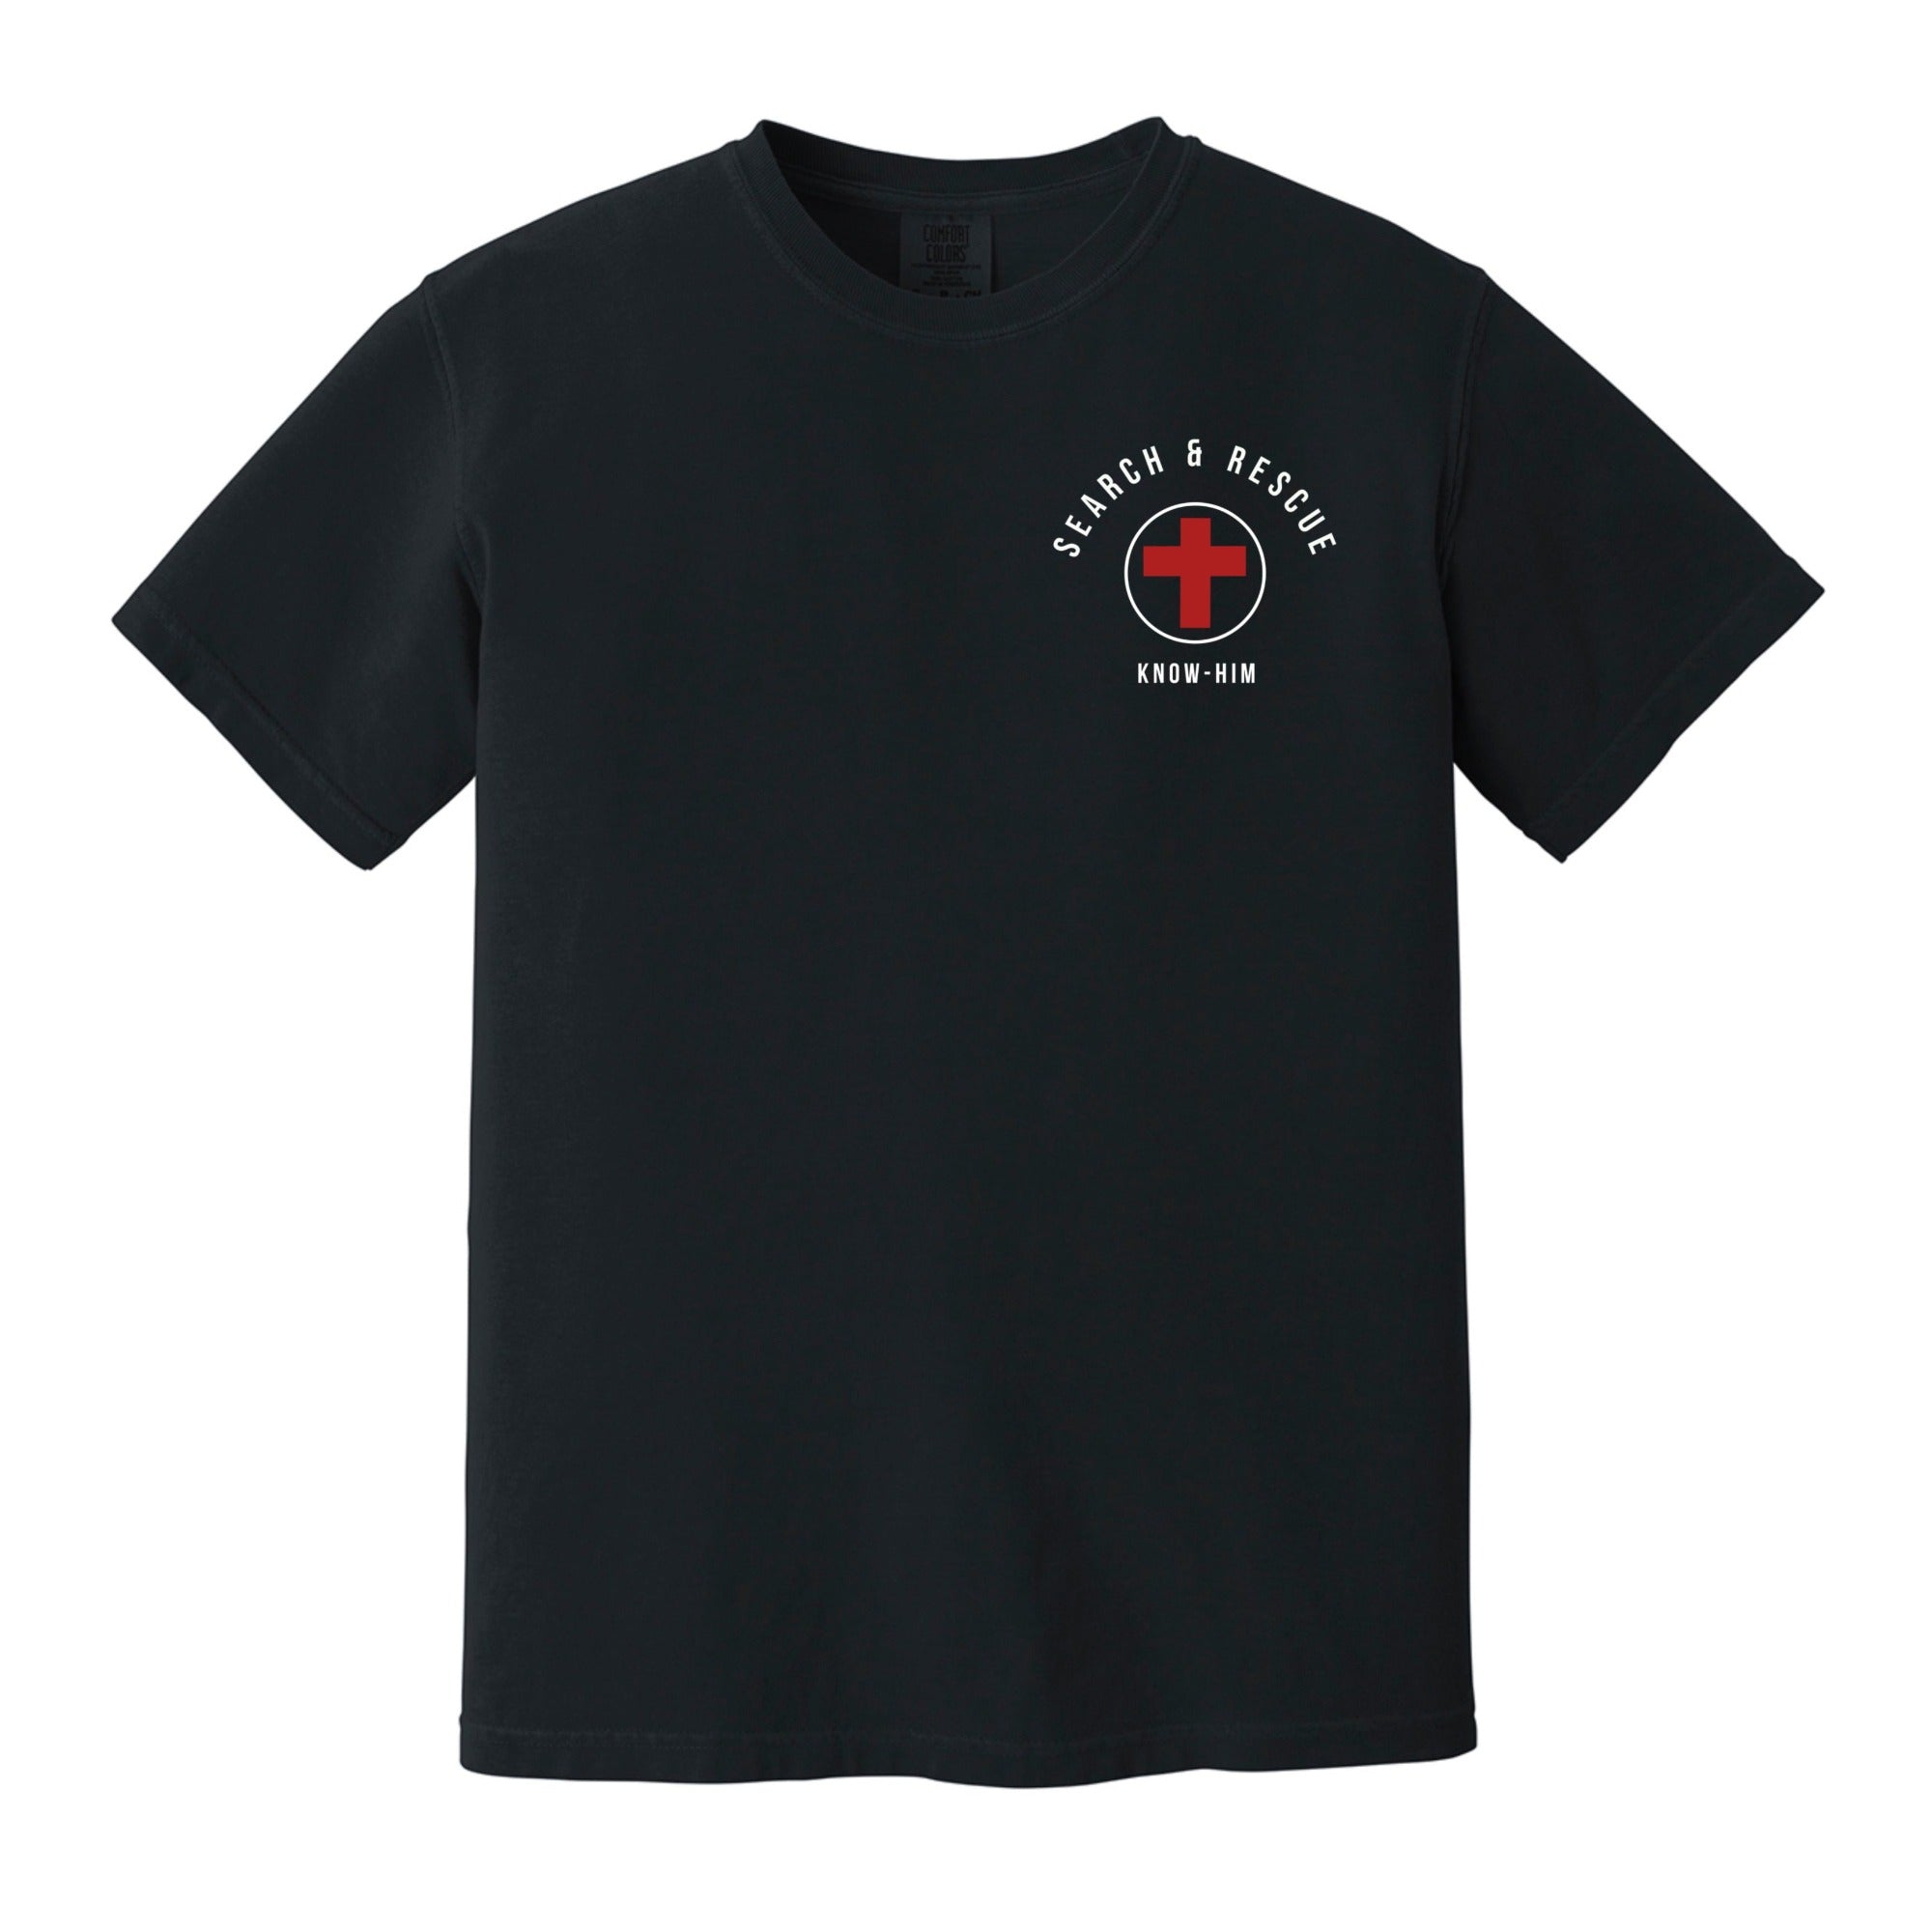 Search and Rescue (Black) - Shirt